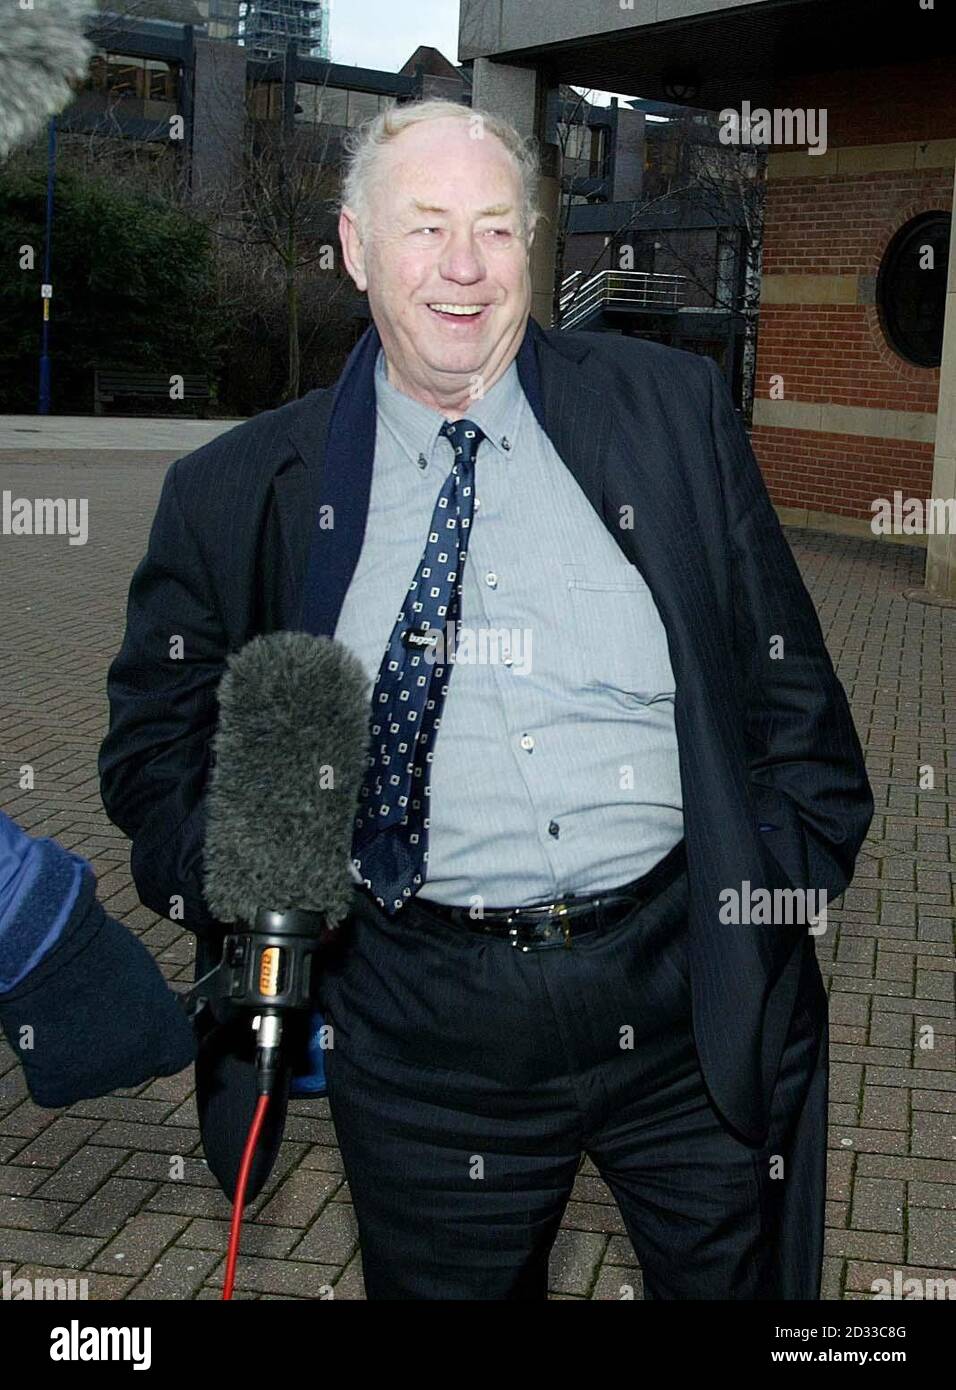 Flamboyant entrepreneur George Reynolds, ranked in a Sunday newspaper's 2000 rich list as being worth   260 million, arriving at Teesside County Court, where he is facing a public examination of his previous company, George Reynolds UK, which went under shortly after he sold it on.  The former safecracker and one-time football club saviour  blamed the buyers of his company for its subsequent demise, telling the hearing that they 'raped and pillaged it' for their own ends. Stock Photo